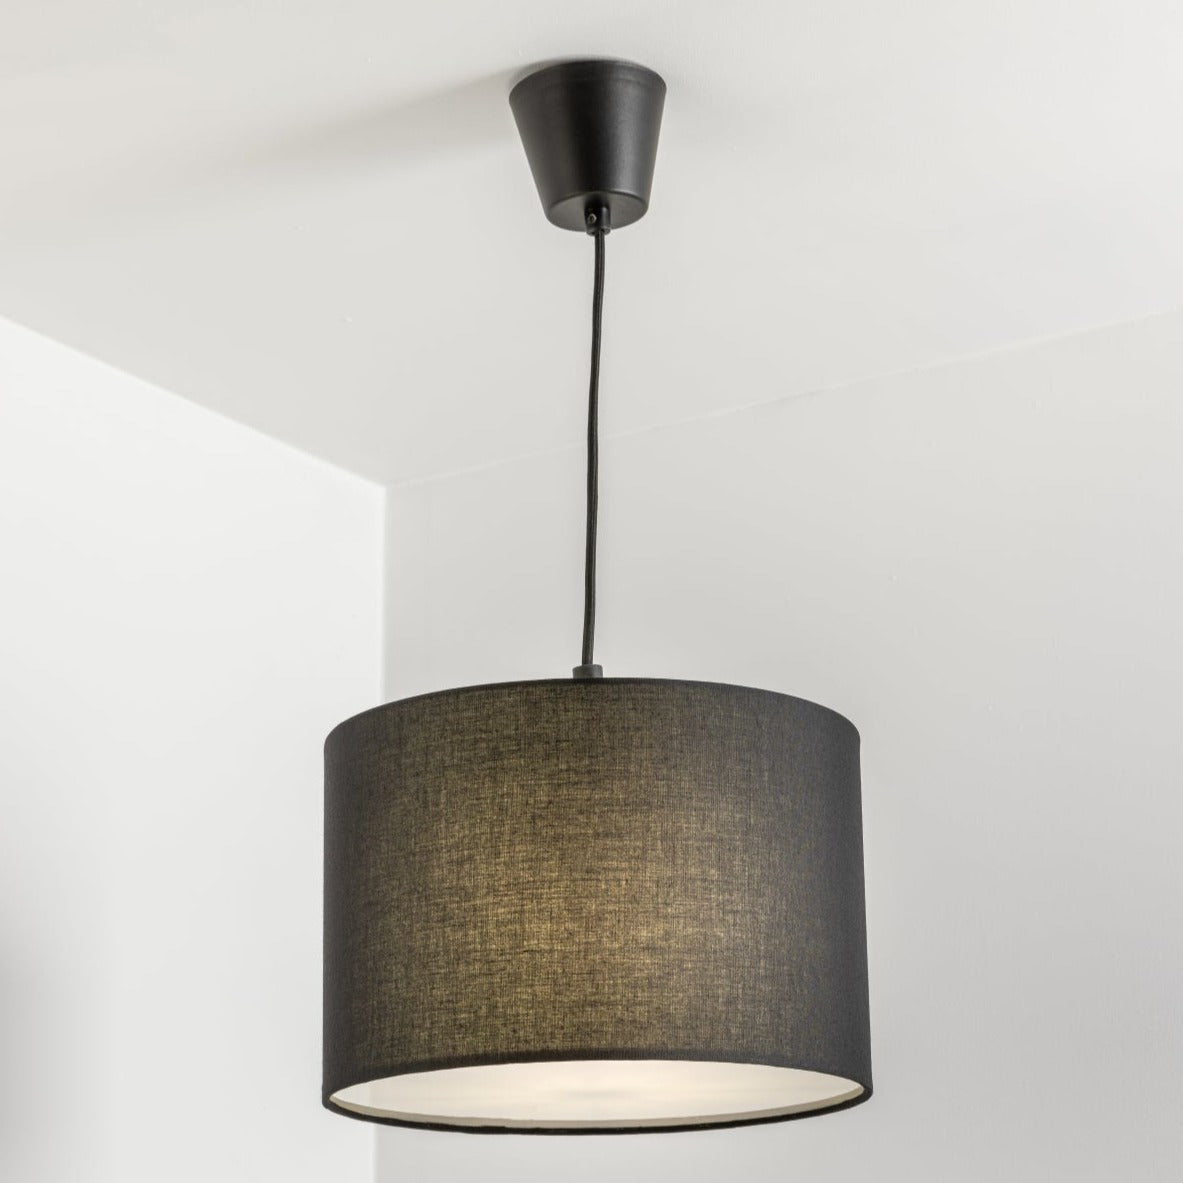 The Lucia is a modern cylinder drum shaped lamp shade in a luxury cotton finish and white opal diffuser, which cleverly enhances the room instantly when illuminated providing a uniform light. This fantastic shade can double up as either a ceiling pendant light shade or table lampshade. Easily fits to your standard ceiling light socket - no wiring required.